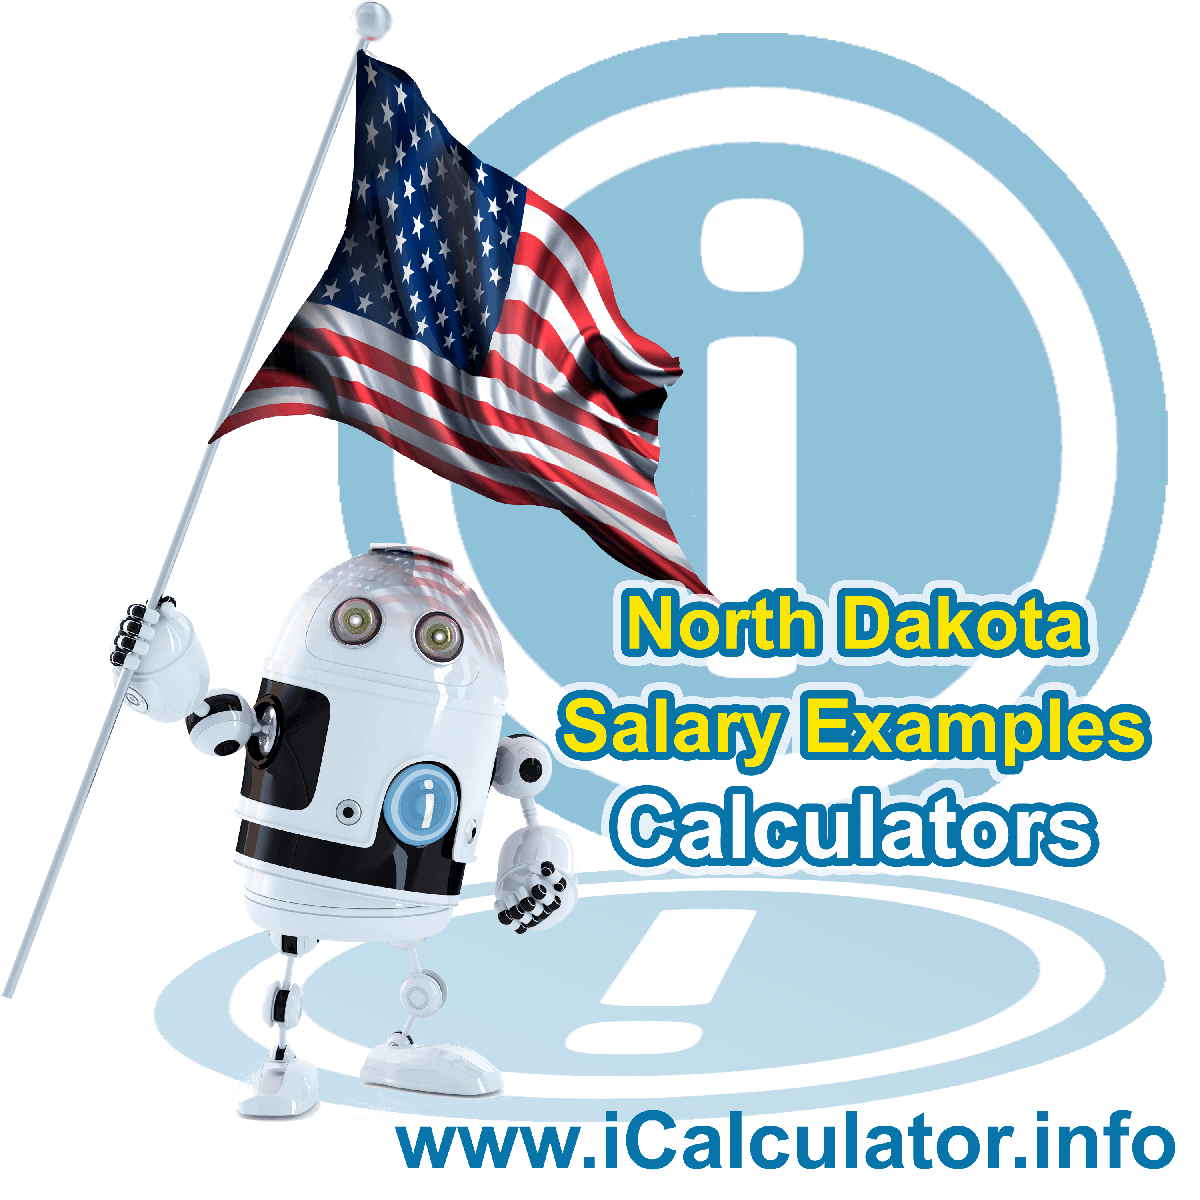 North Dakota Salary Example for $ 300,000.00 in 2023 | iCalculator™ | $ 300,000.00 salary example for employee and employer paying North Dakota State tincome taxes. Detailed salary after tax calculation including North Dakota State Tax, Federal State Tax, Medicare Deductions, Social Security, Capital Gains and other income tax and salary deductions complete with supporting North Dakota state tax tables 